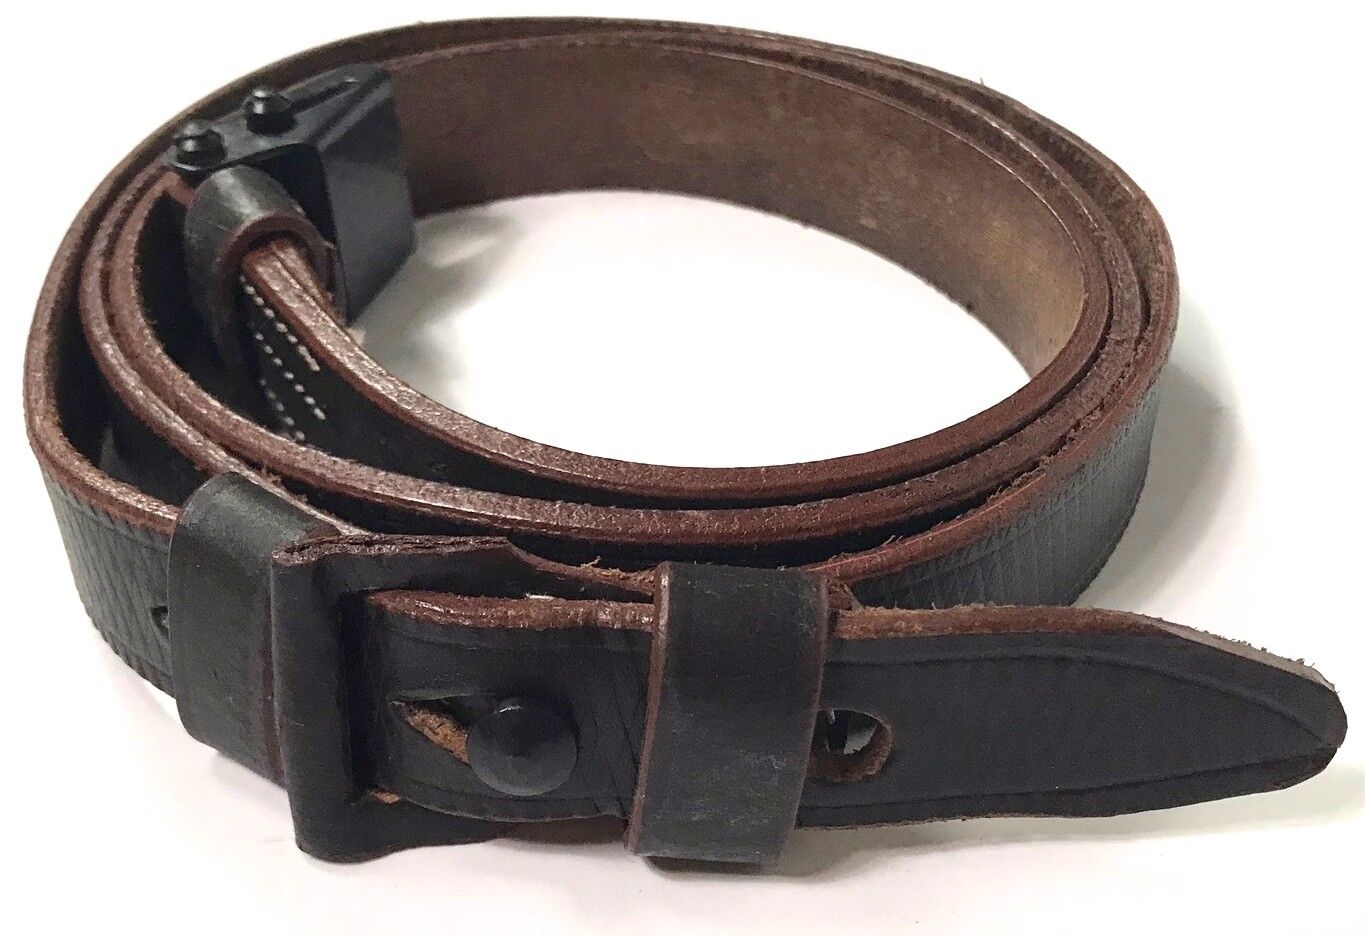 WWII GERMAN K98 98K RIFLE LEATHER RIFLE CARRY SLING-OILED, MAKER MARKED